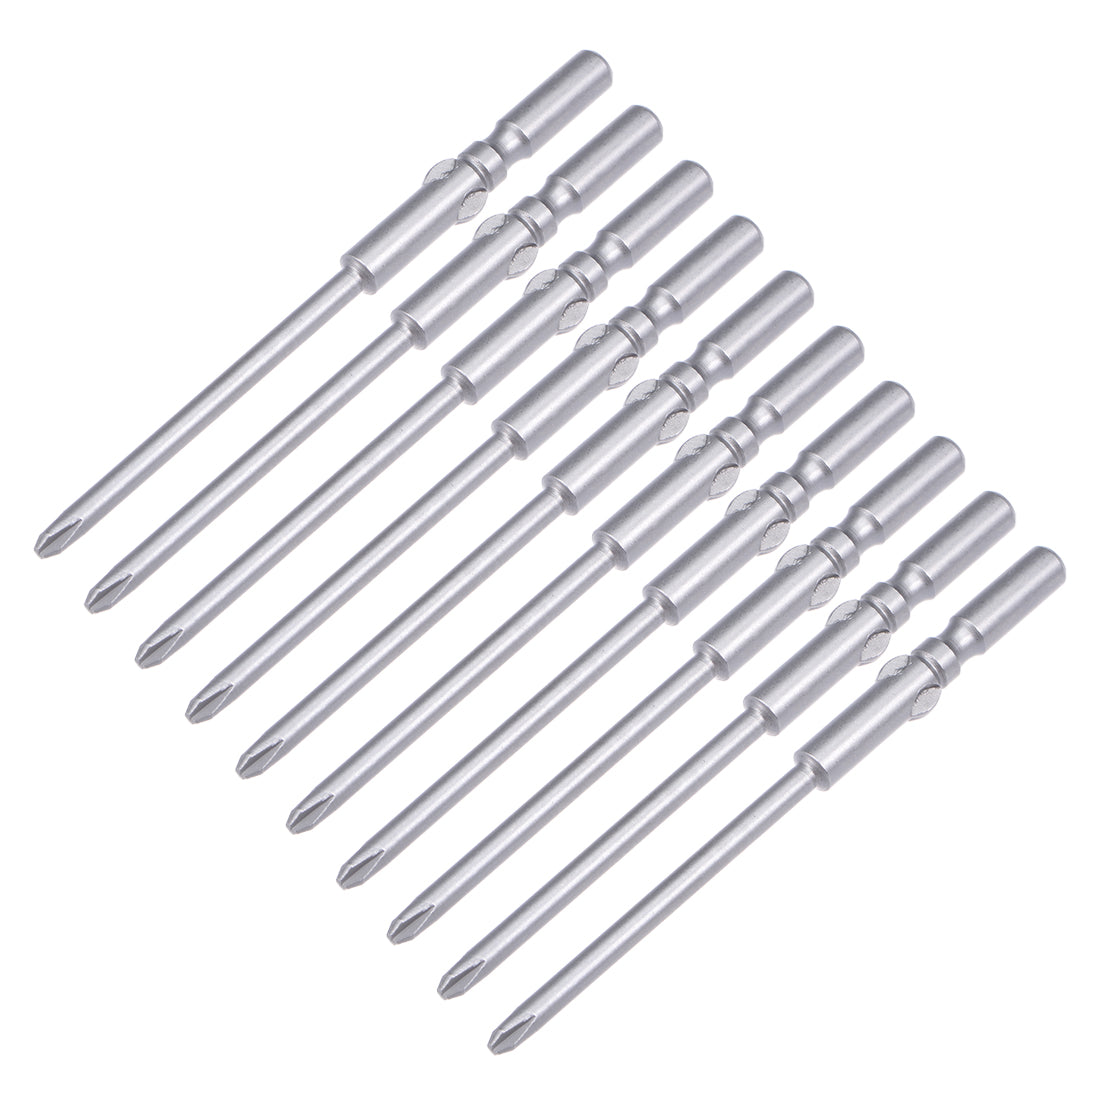 Uxcell Uxcell 10 Pcs 5mm Shank 60mm Length 3.5mm Phillips PH1 Magnetic S2 Screwdriver Bits